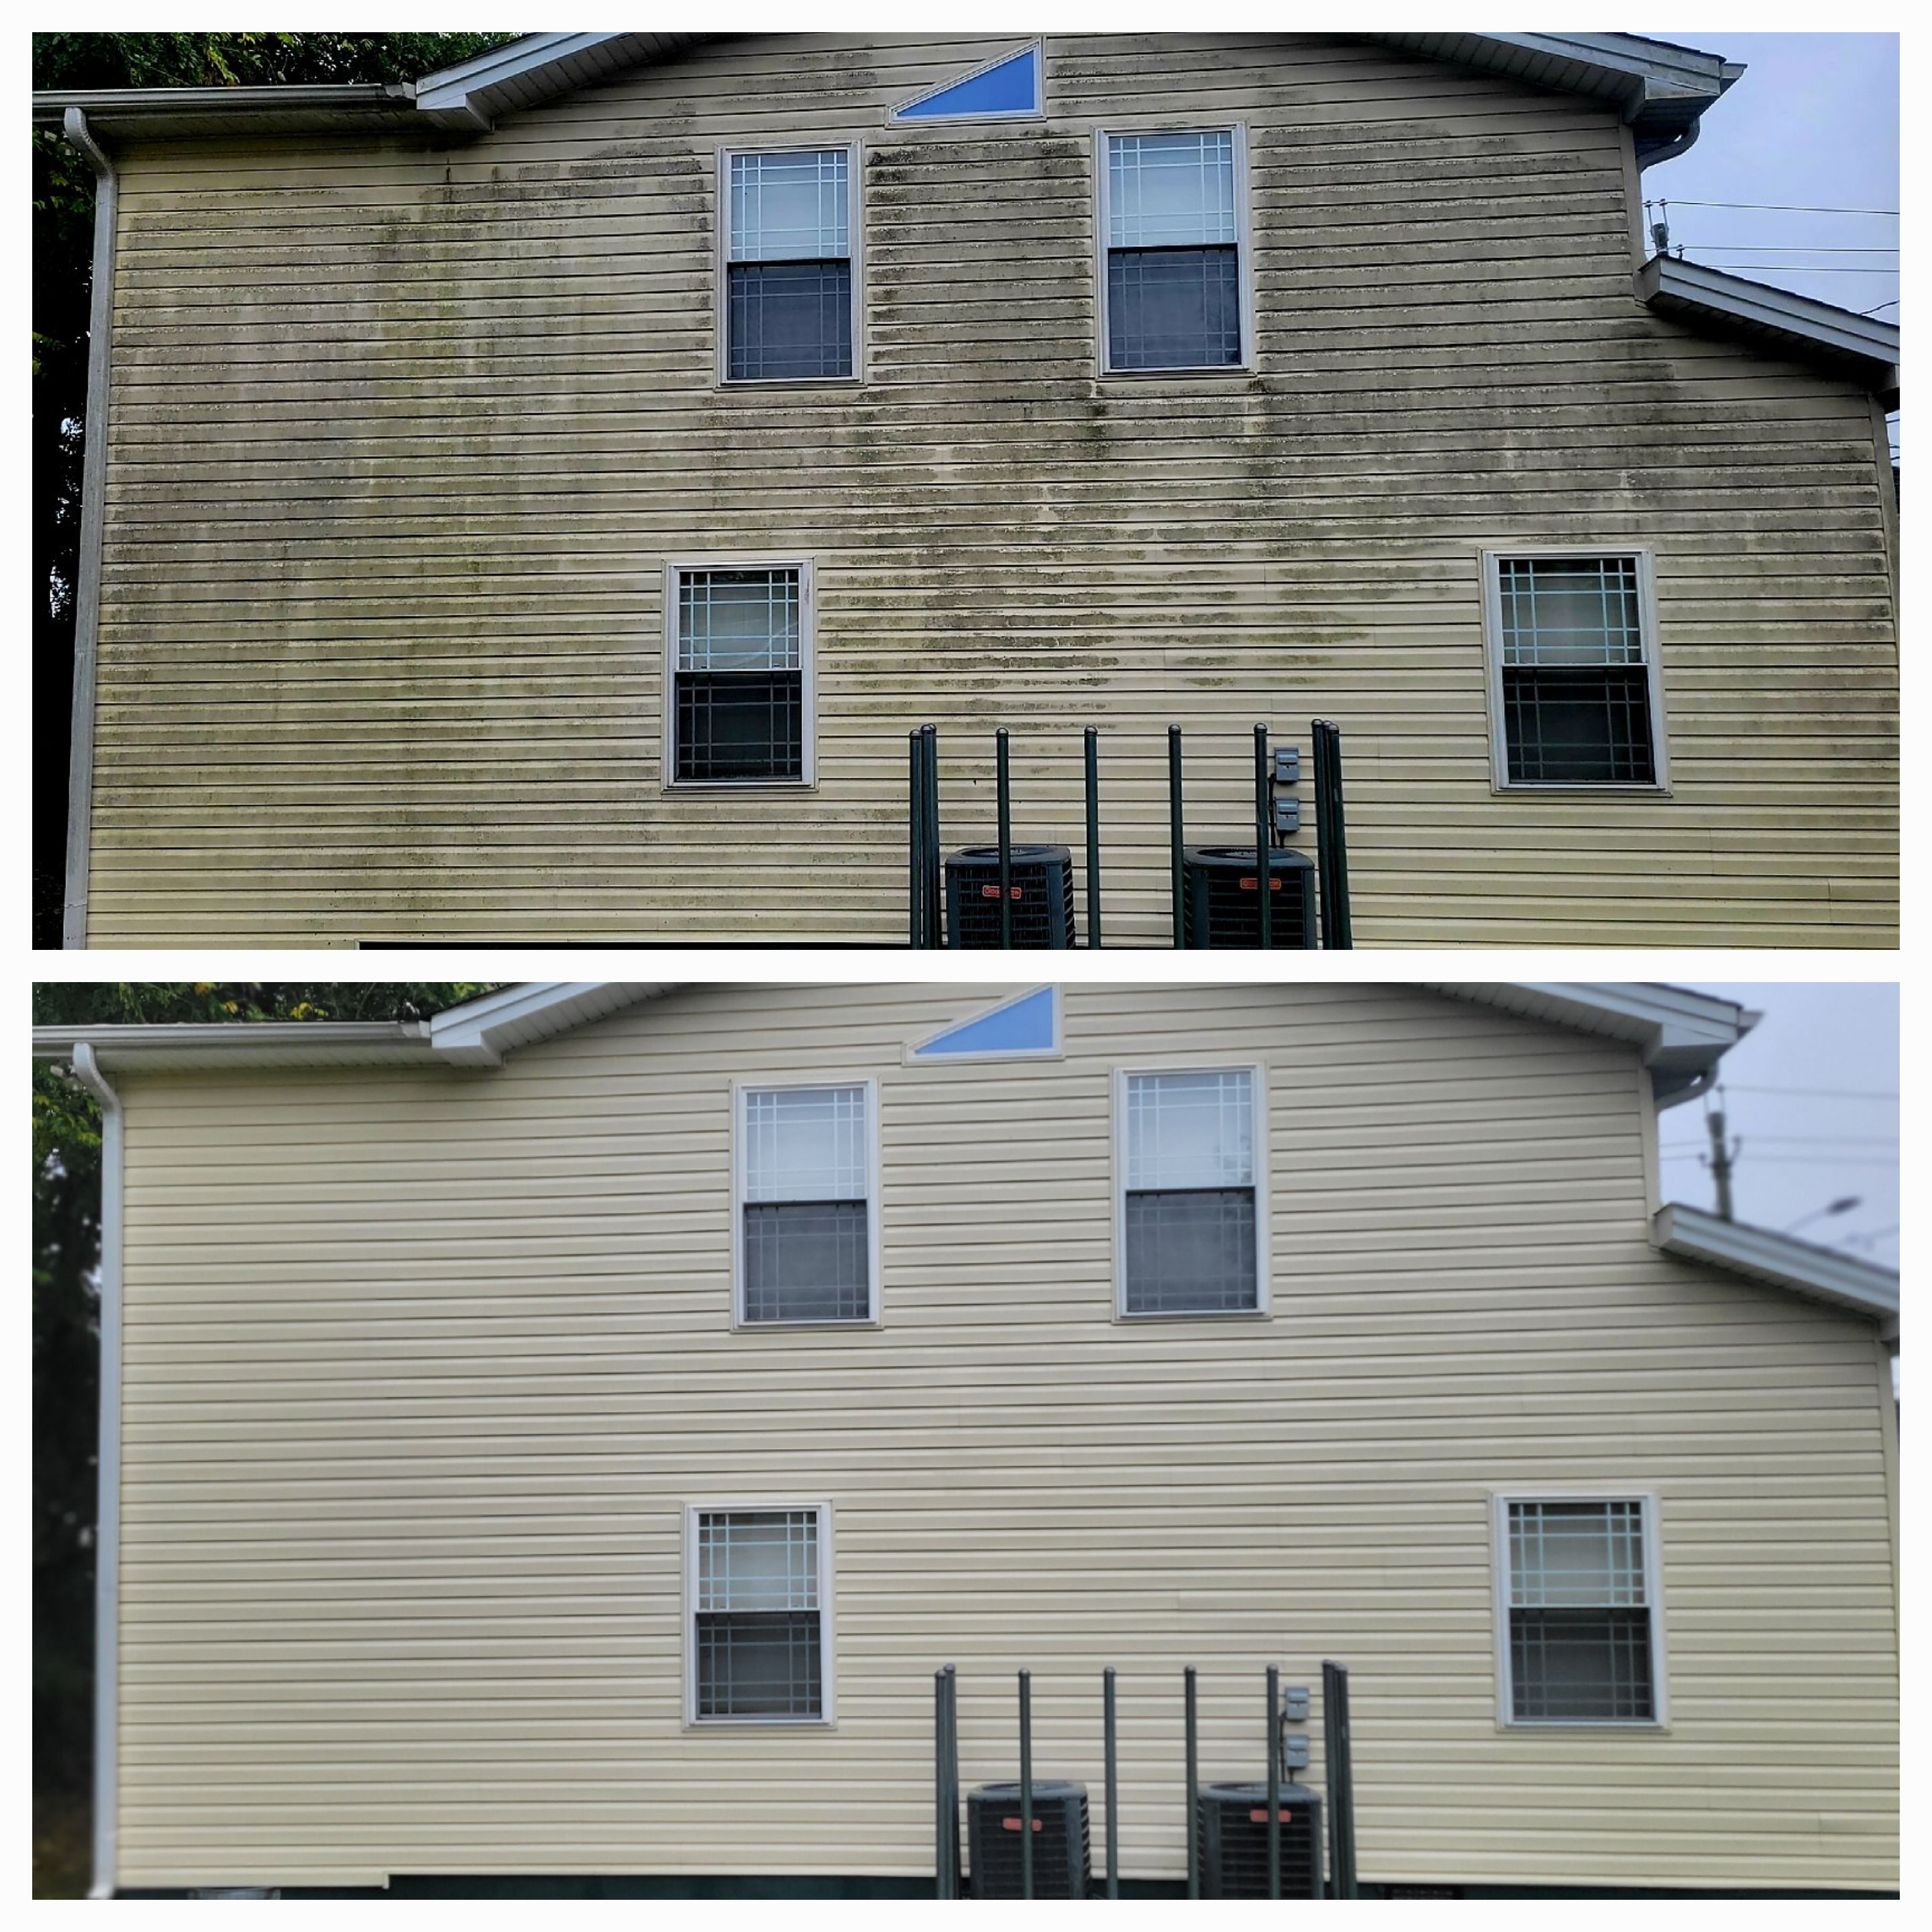 Top Notch House Wash Service Performed in Gastonia, NC 